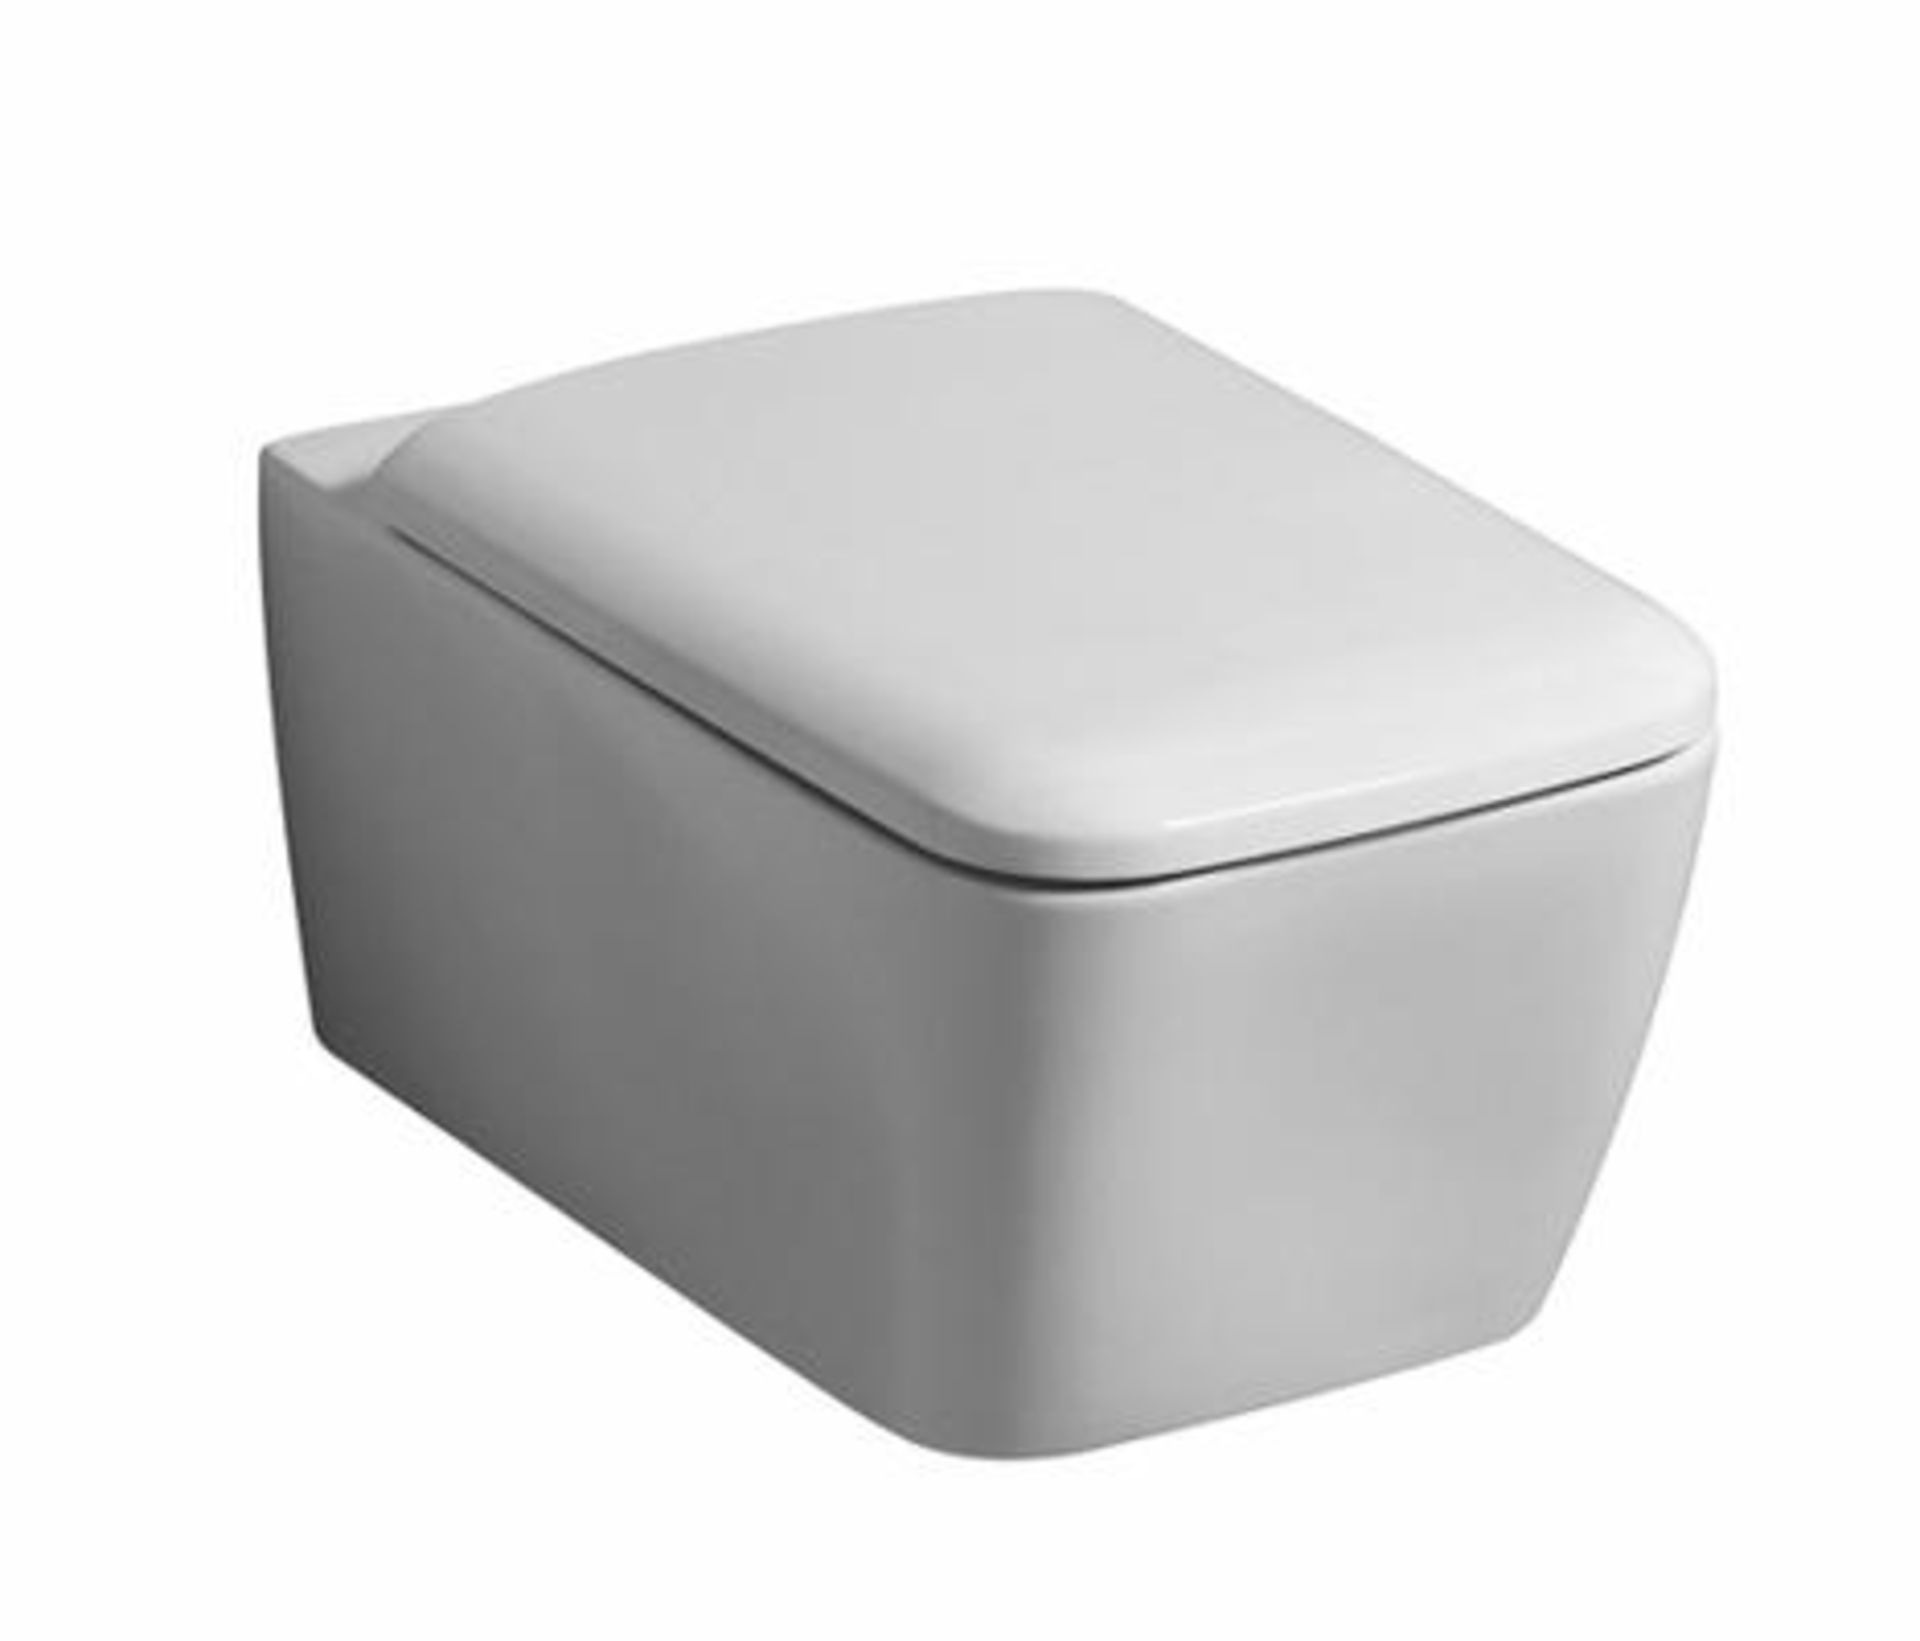 Keramag It! Back to wall Toilet Pan. The complete bathroom it! brings clear modernity to the ba...